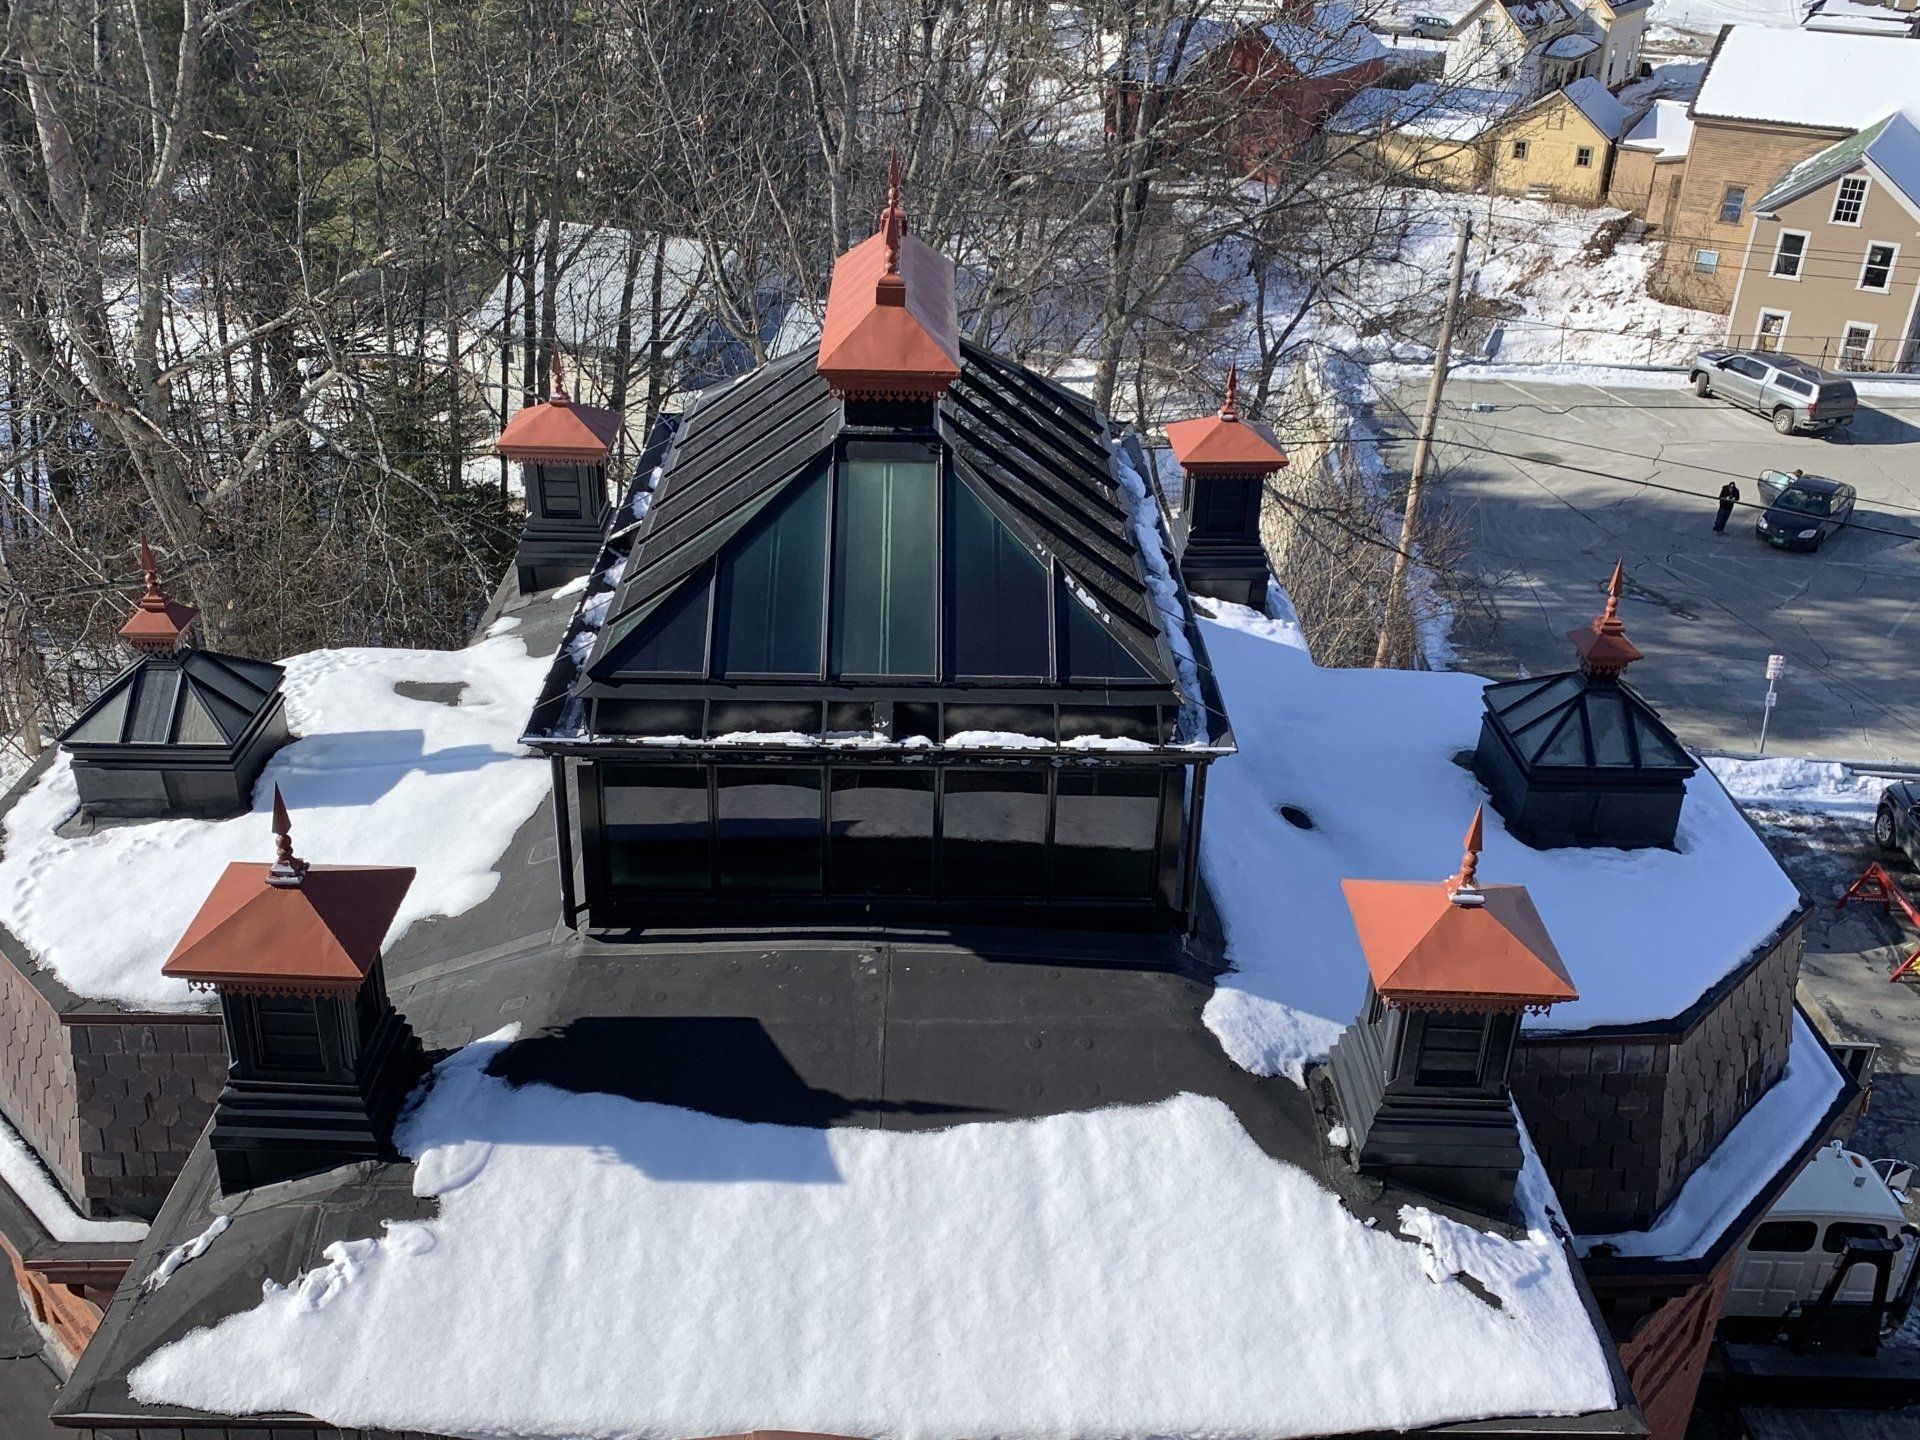 Slate Shingle roof installed by Vermont Roofing Contractors at Rodd Roofing in Winter